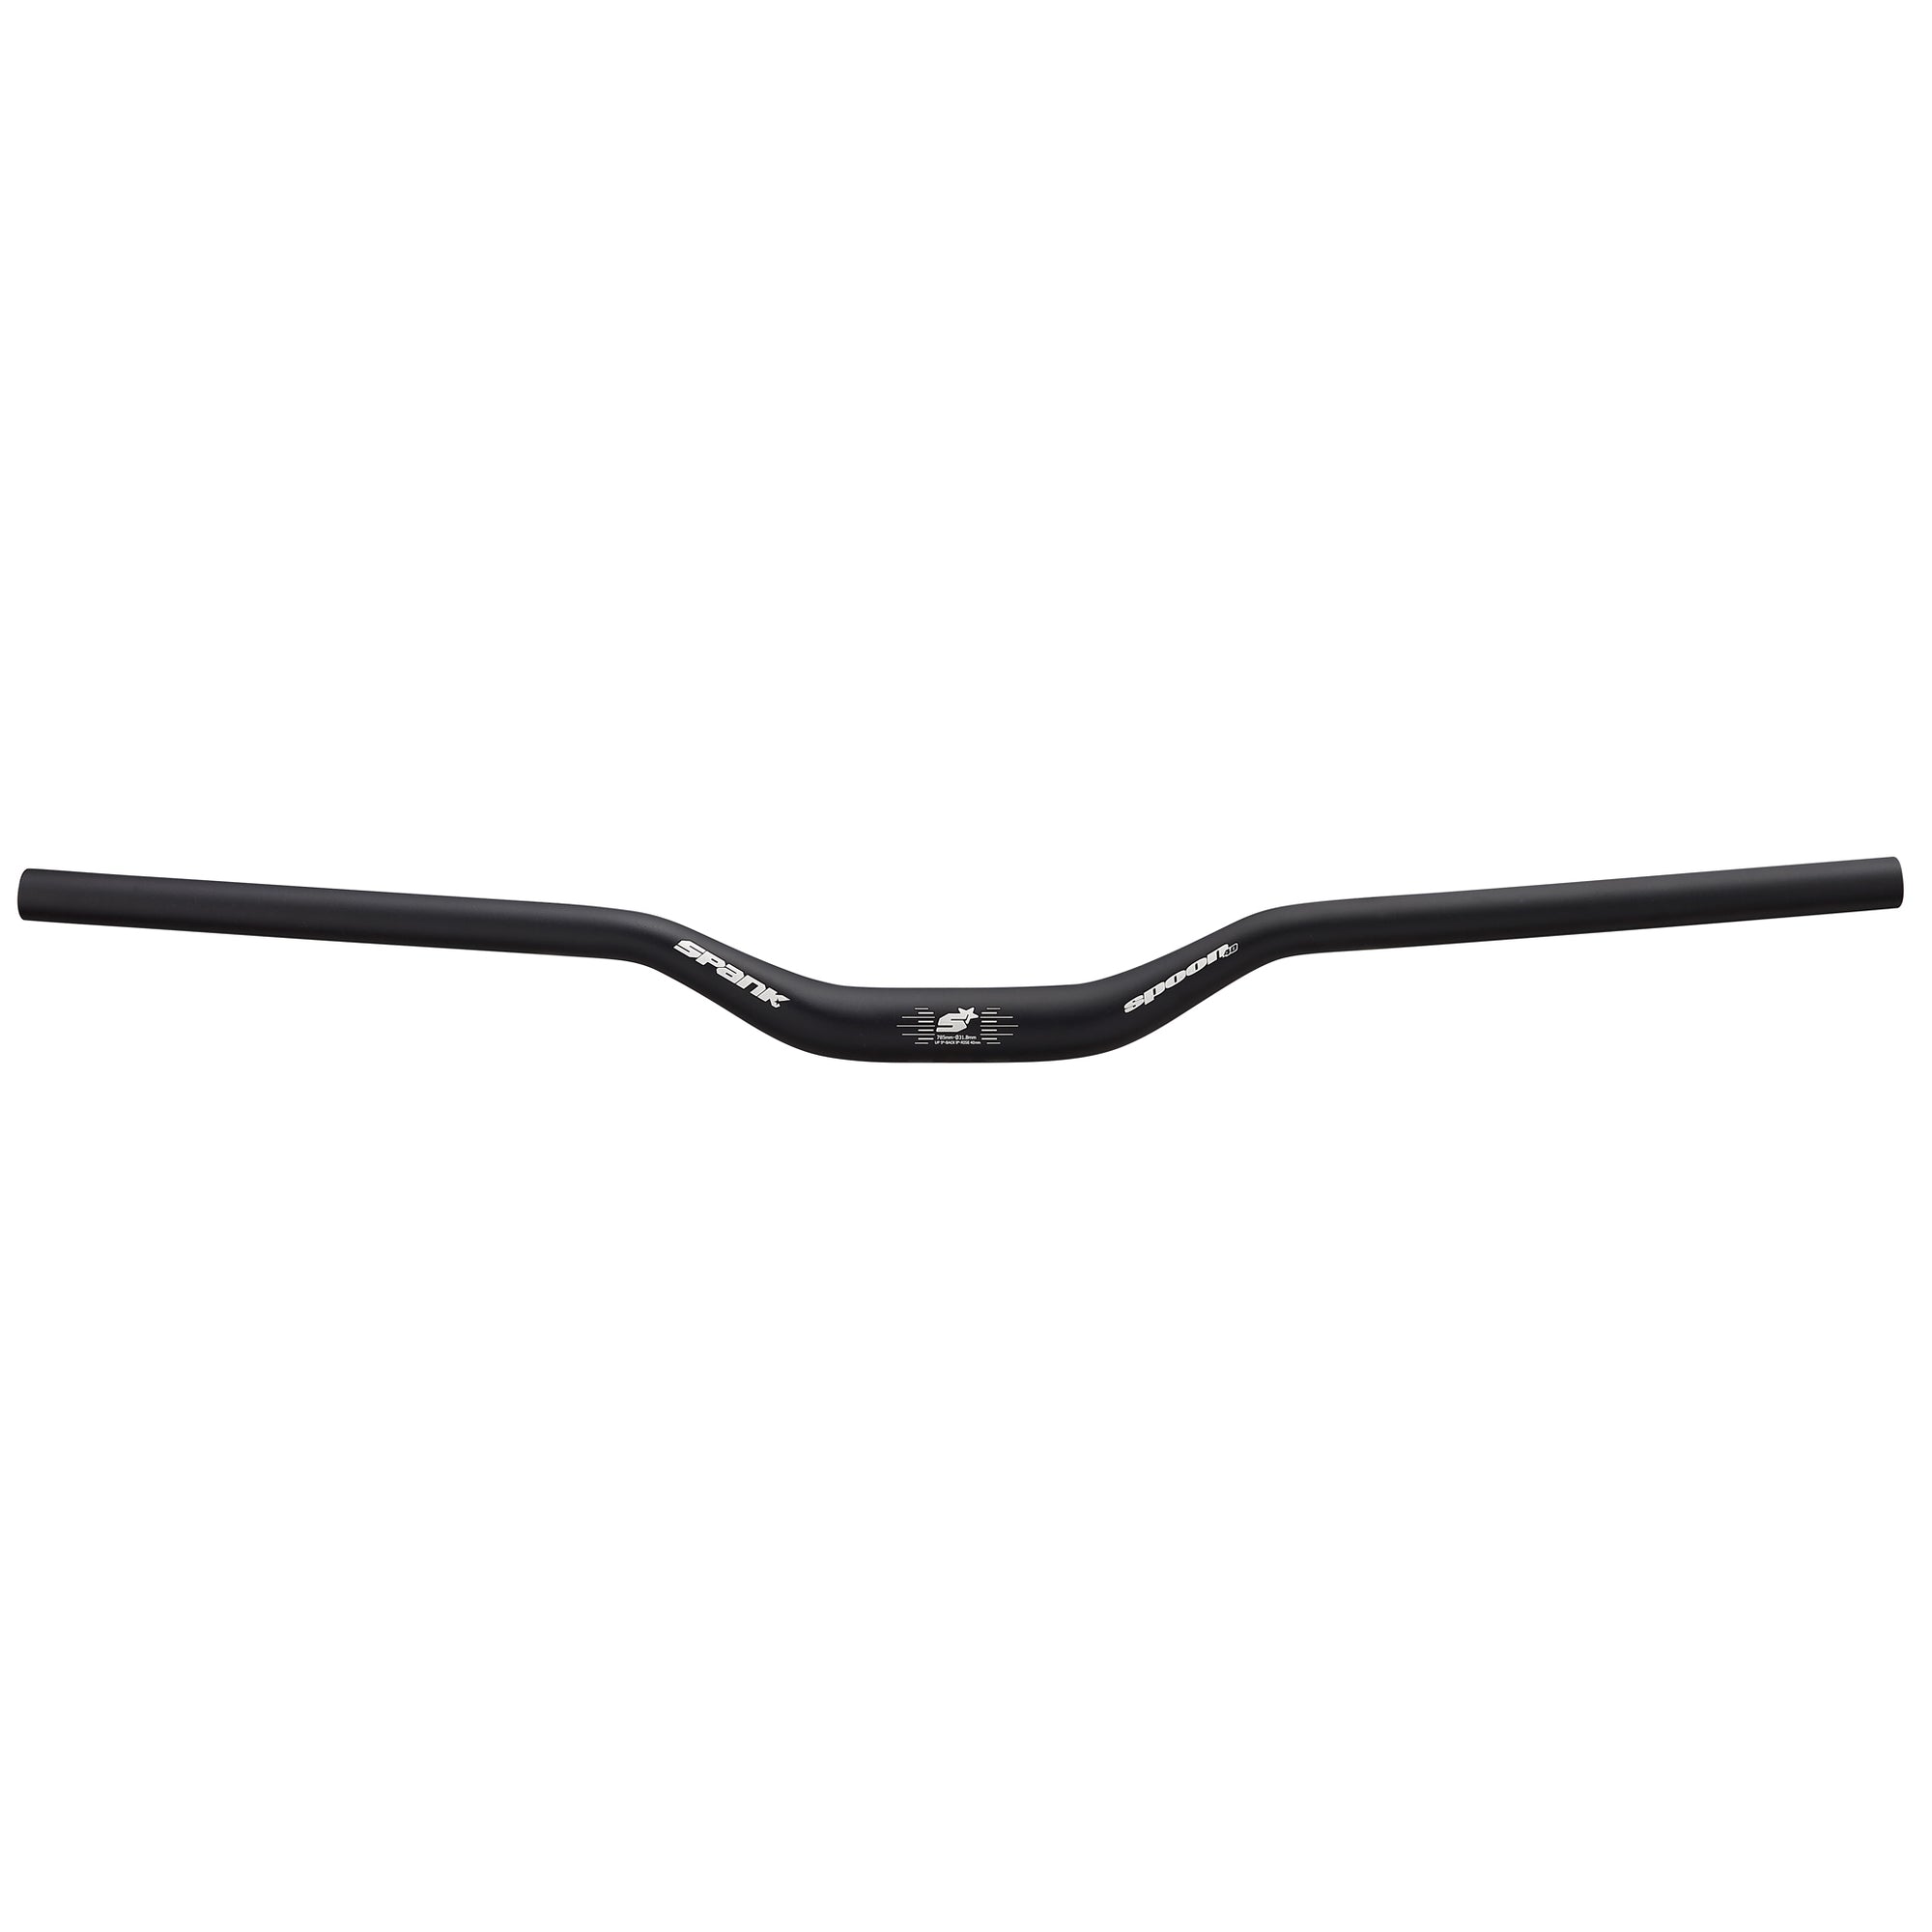 Spank Spoon 40 Handlebar - 40mm Rise (31.8mm) - Downtown Bicycle Works 